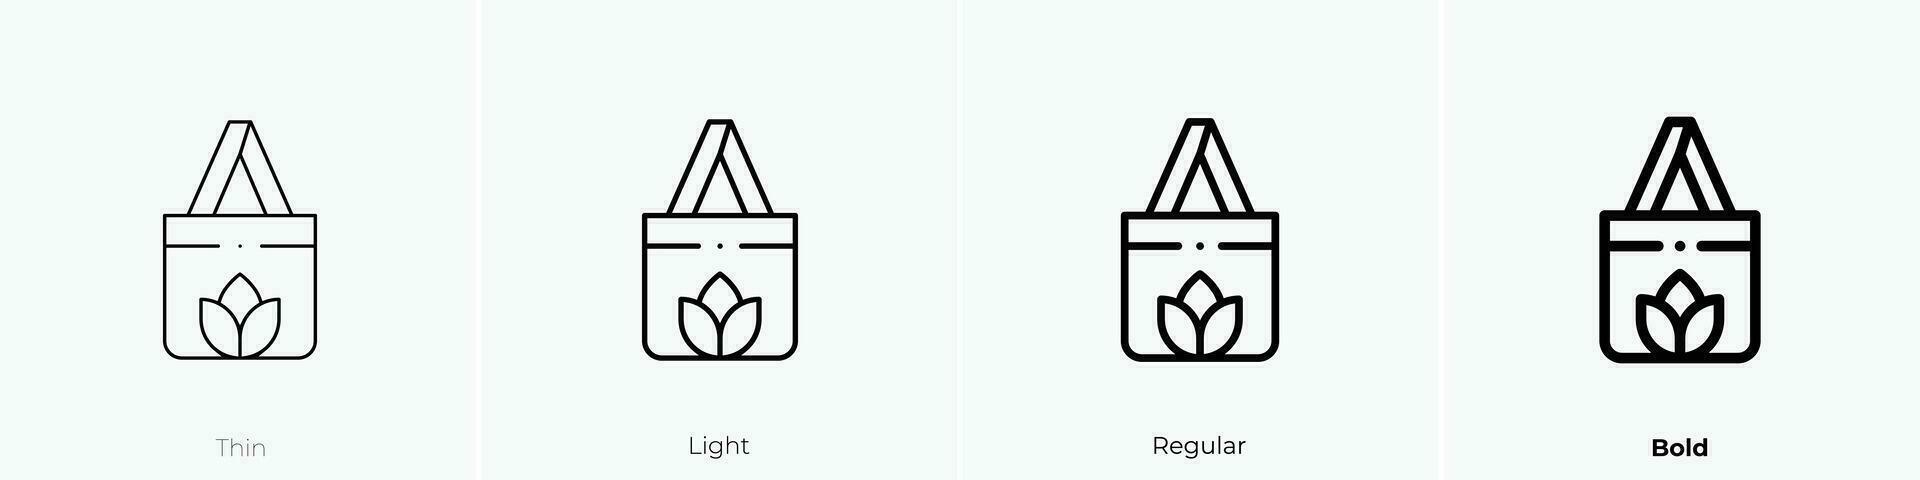 totebag icon. Thin, Light, Regular And Bold style design isolated on white background vector